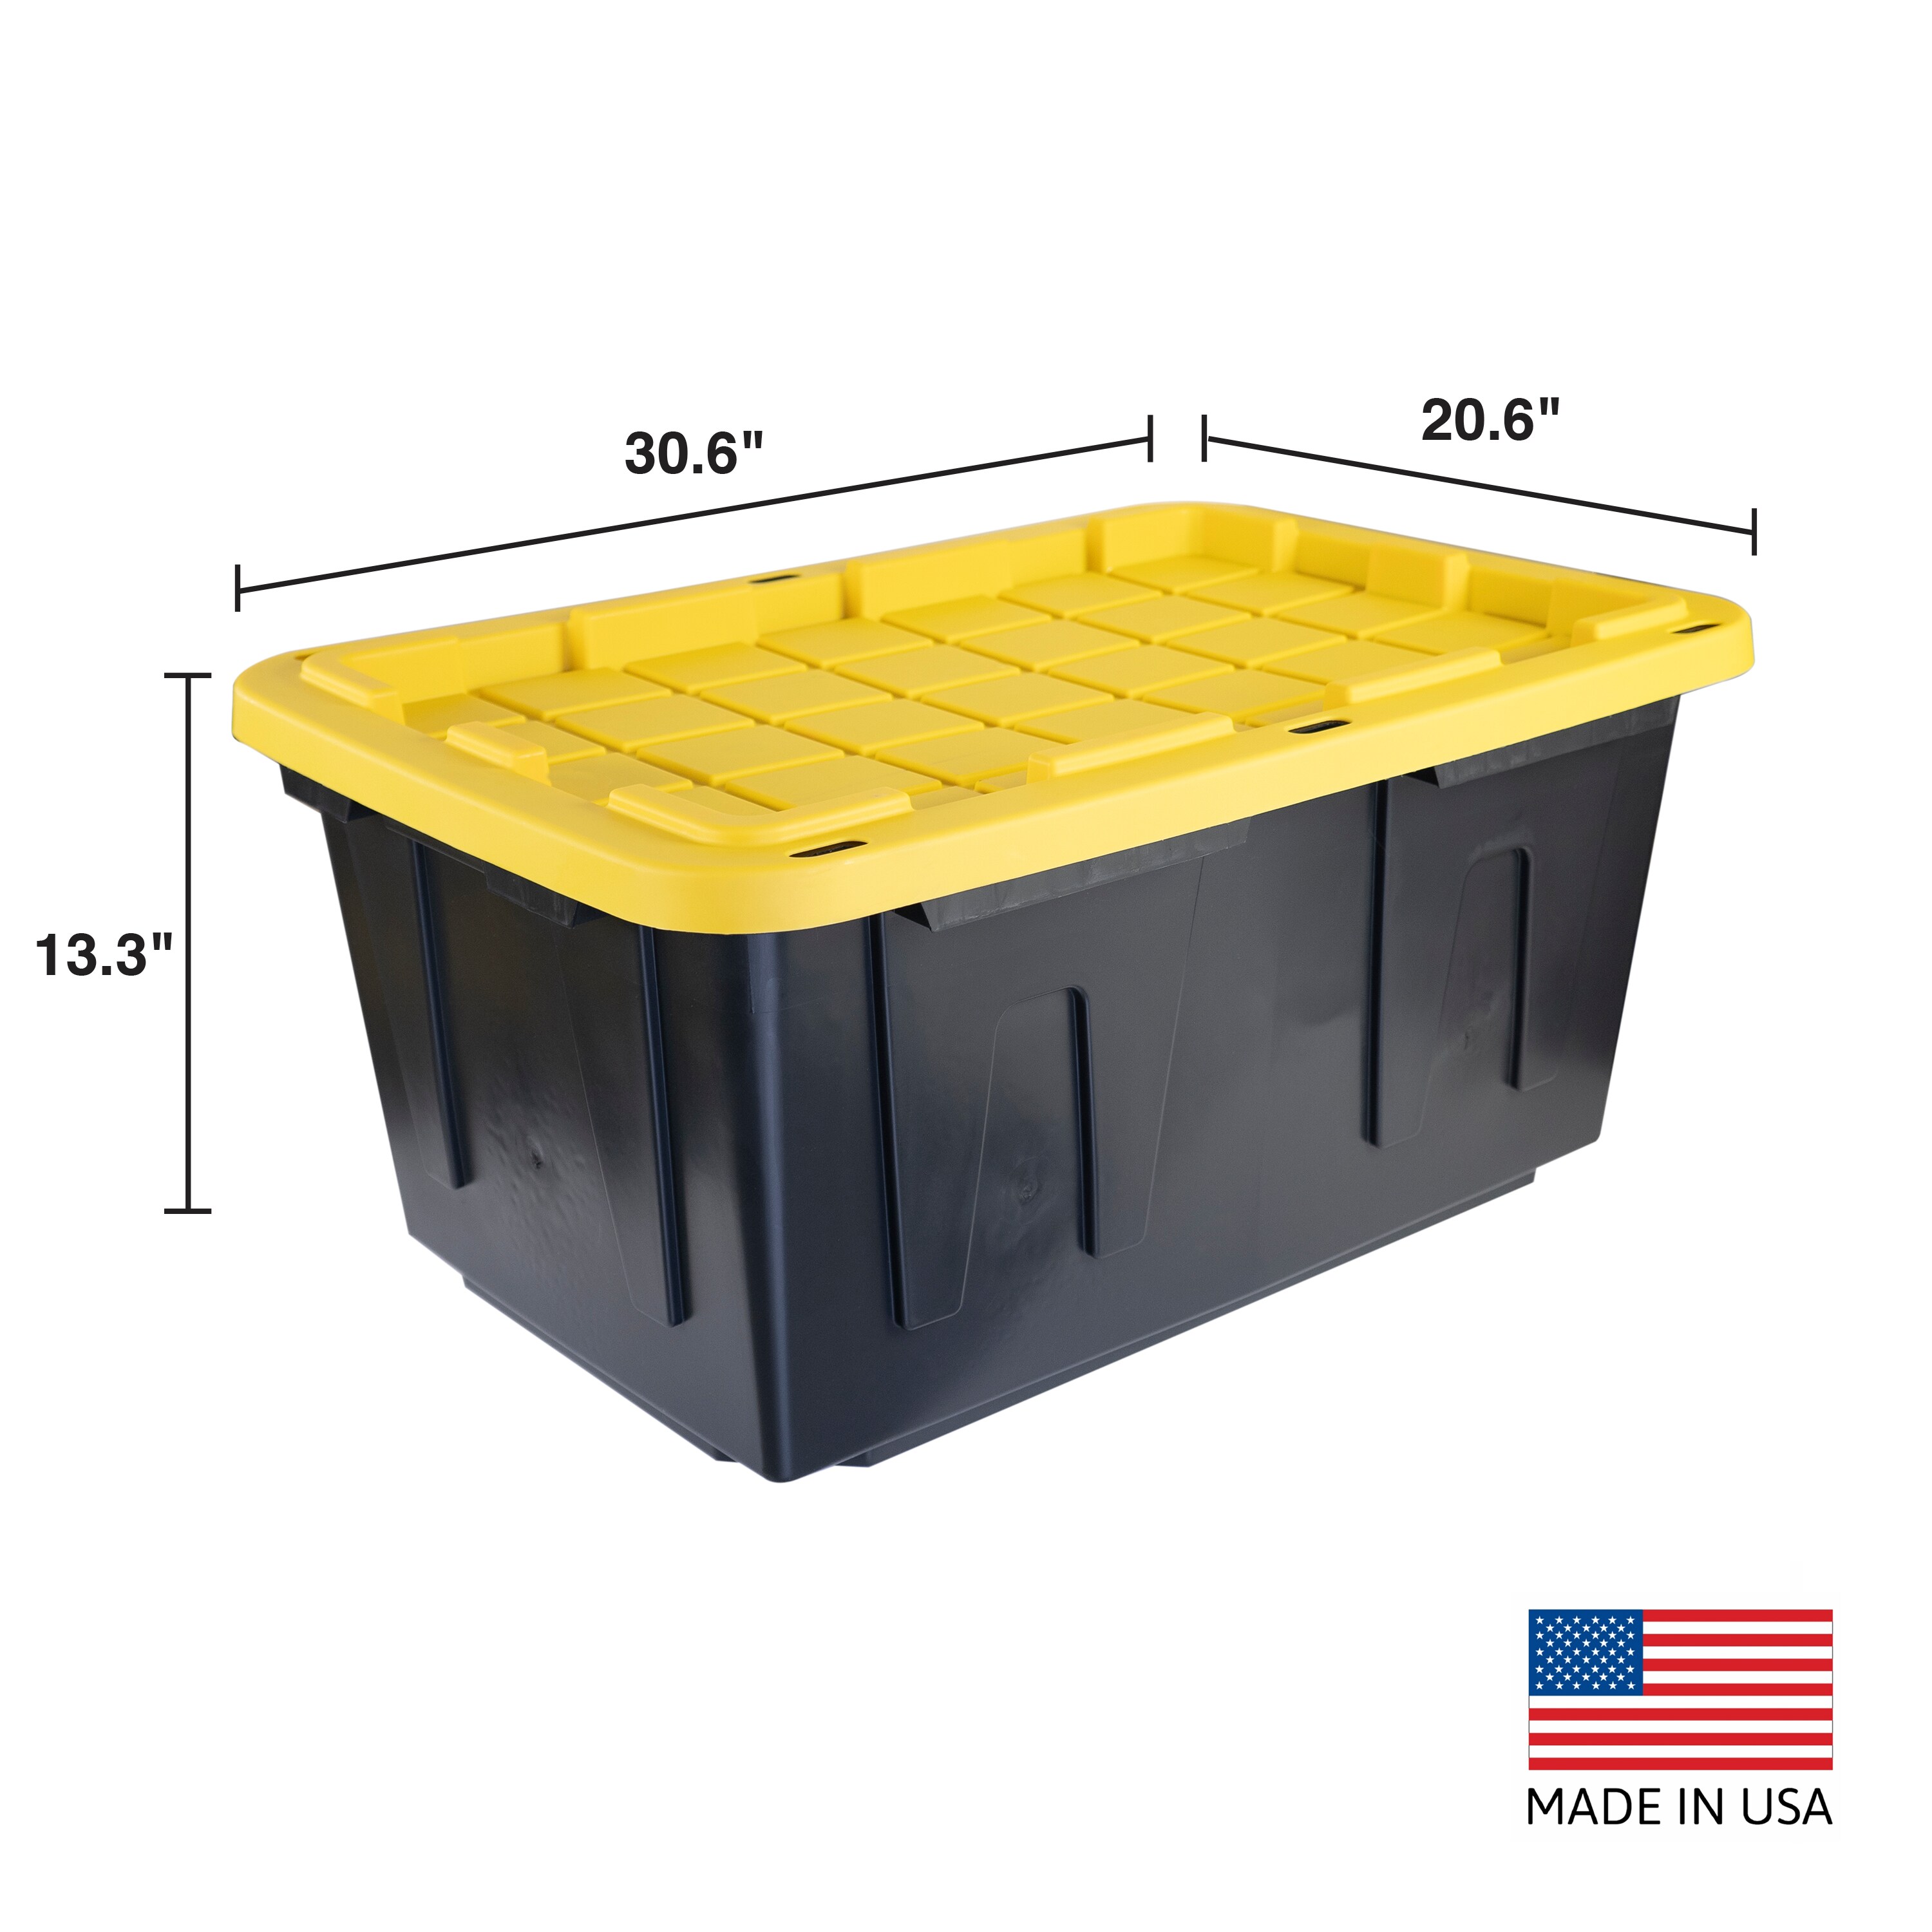 27 Gallon Tote - Made in the USA by Doyle Shamrock Industries